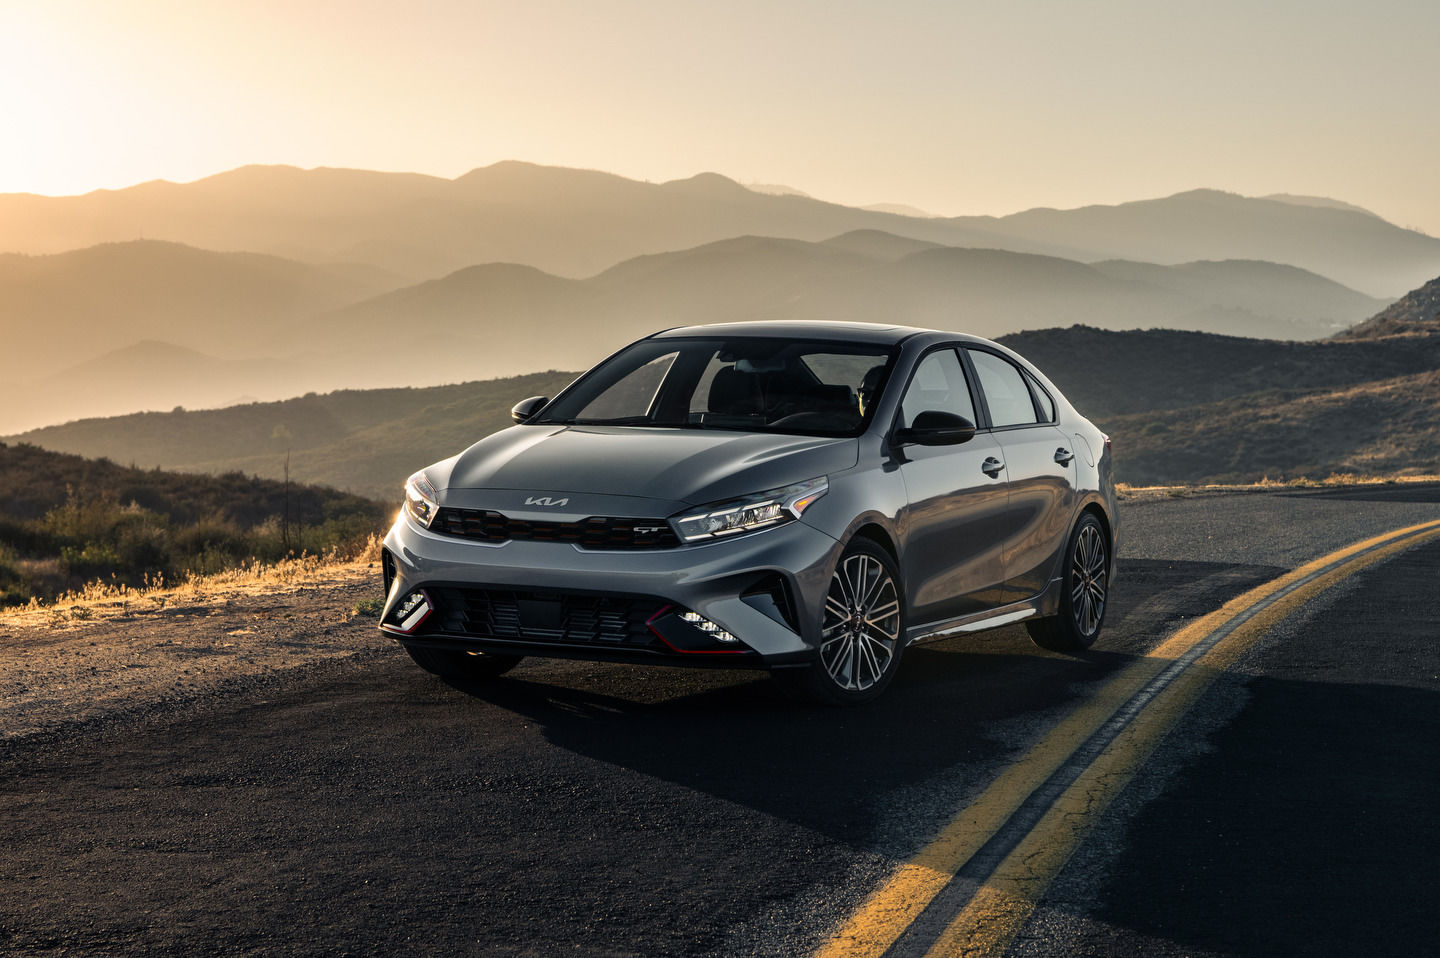 Kia reaches new heights with its sales numbers in 2021